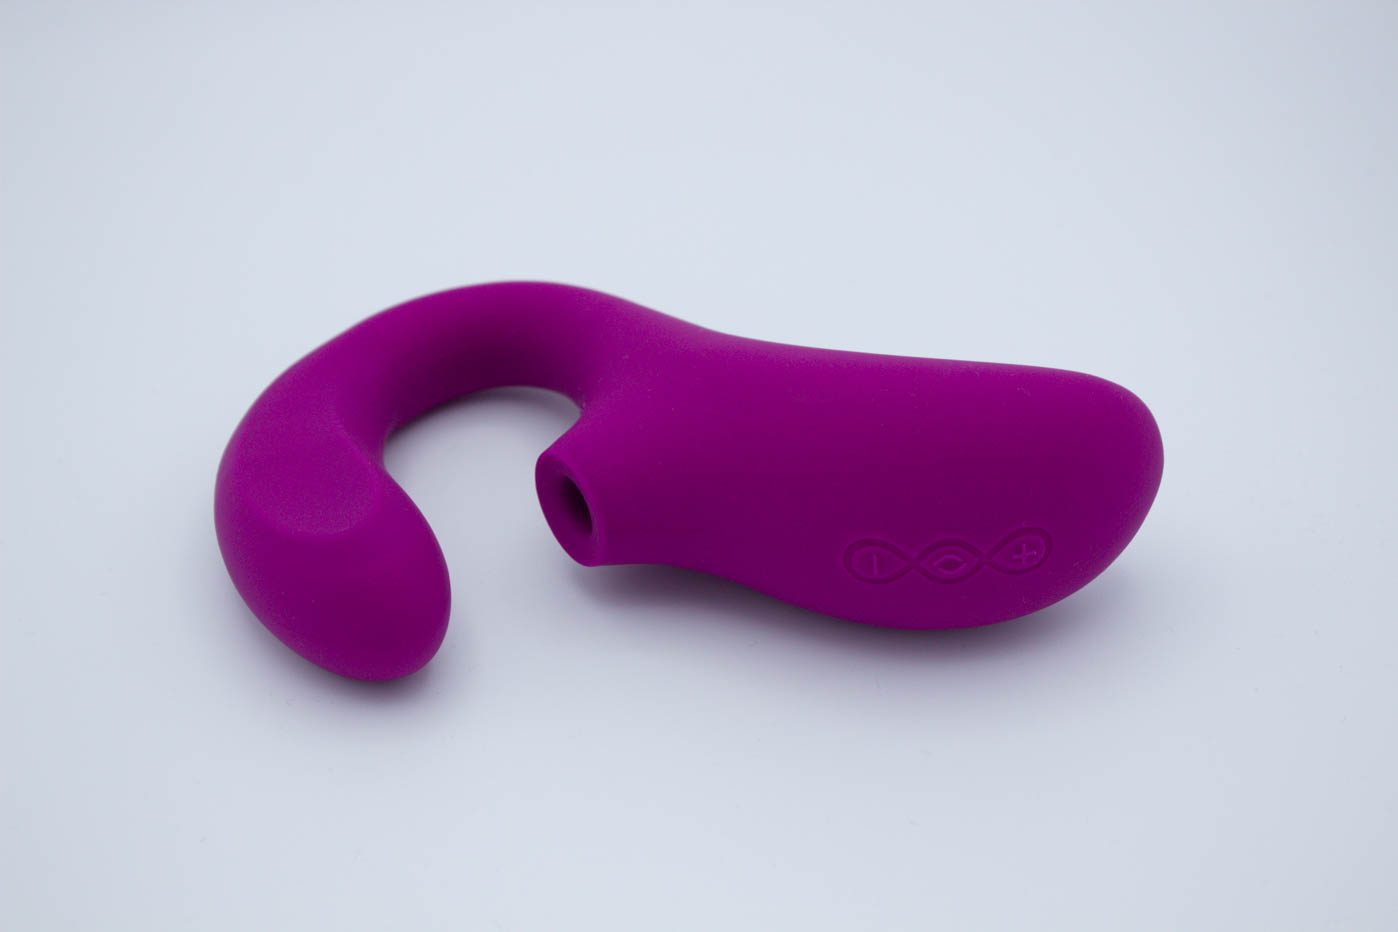 Enigma Cruise by Lelo sextech face